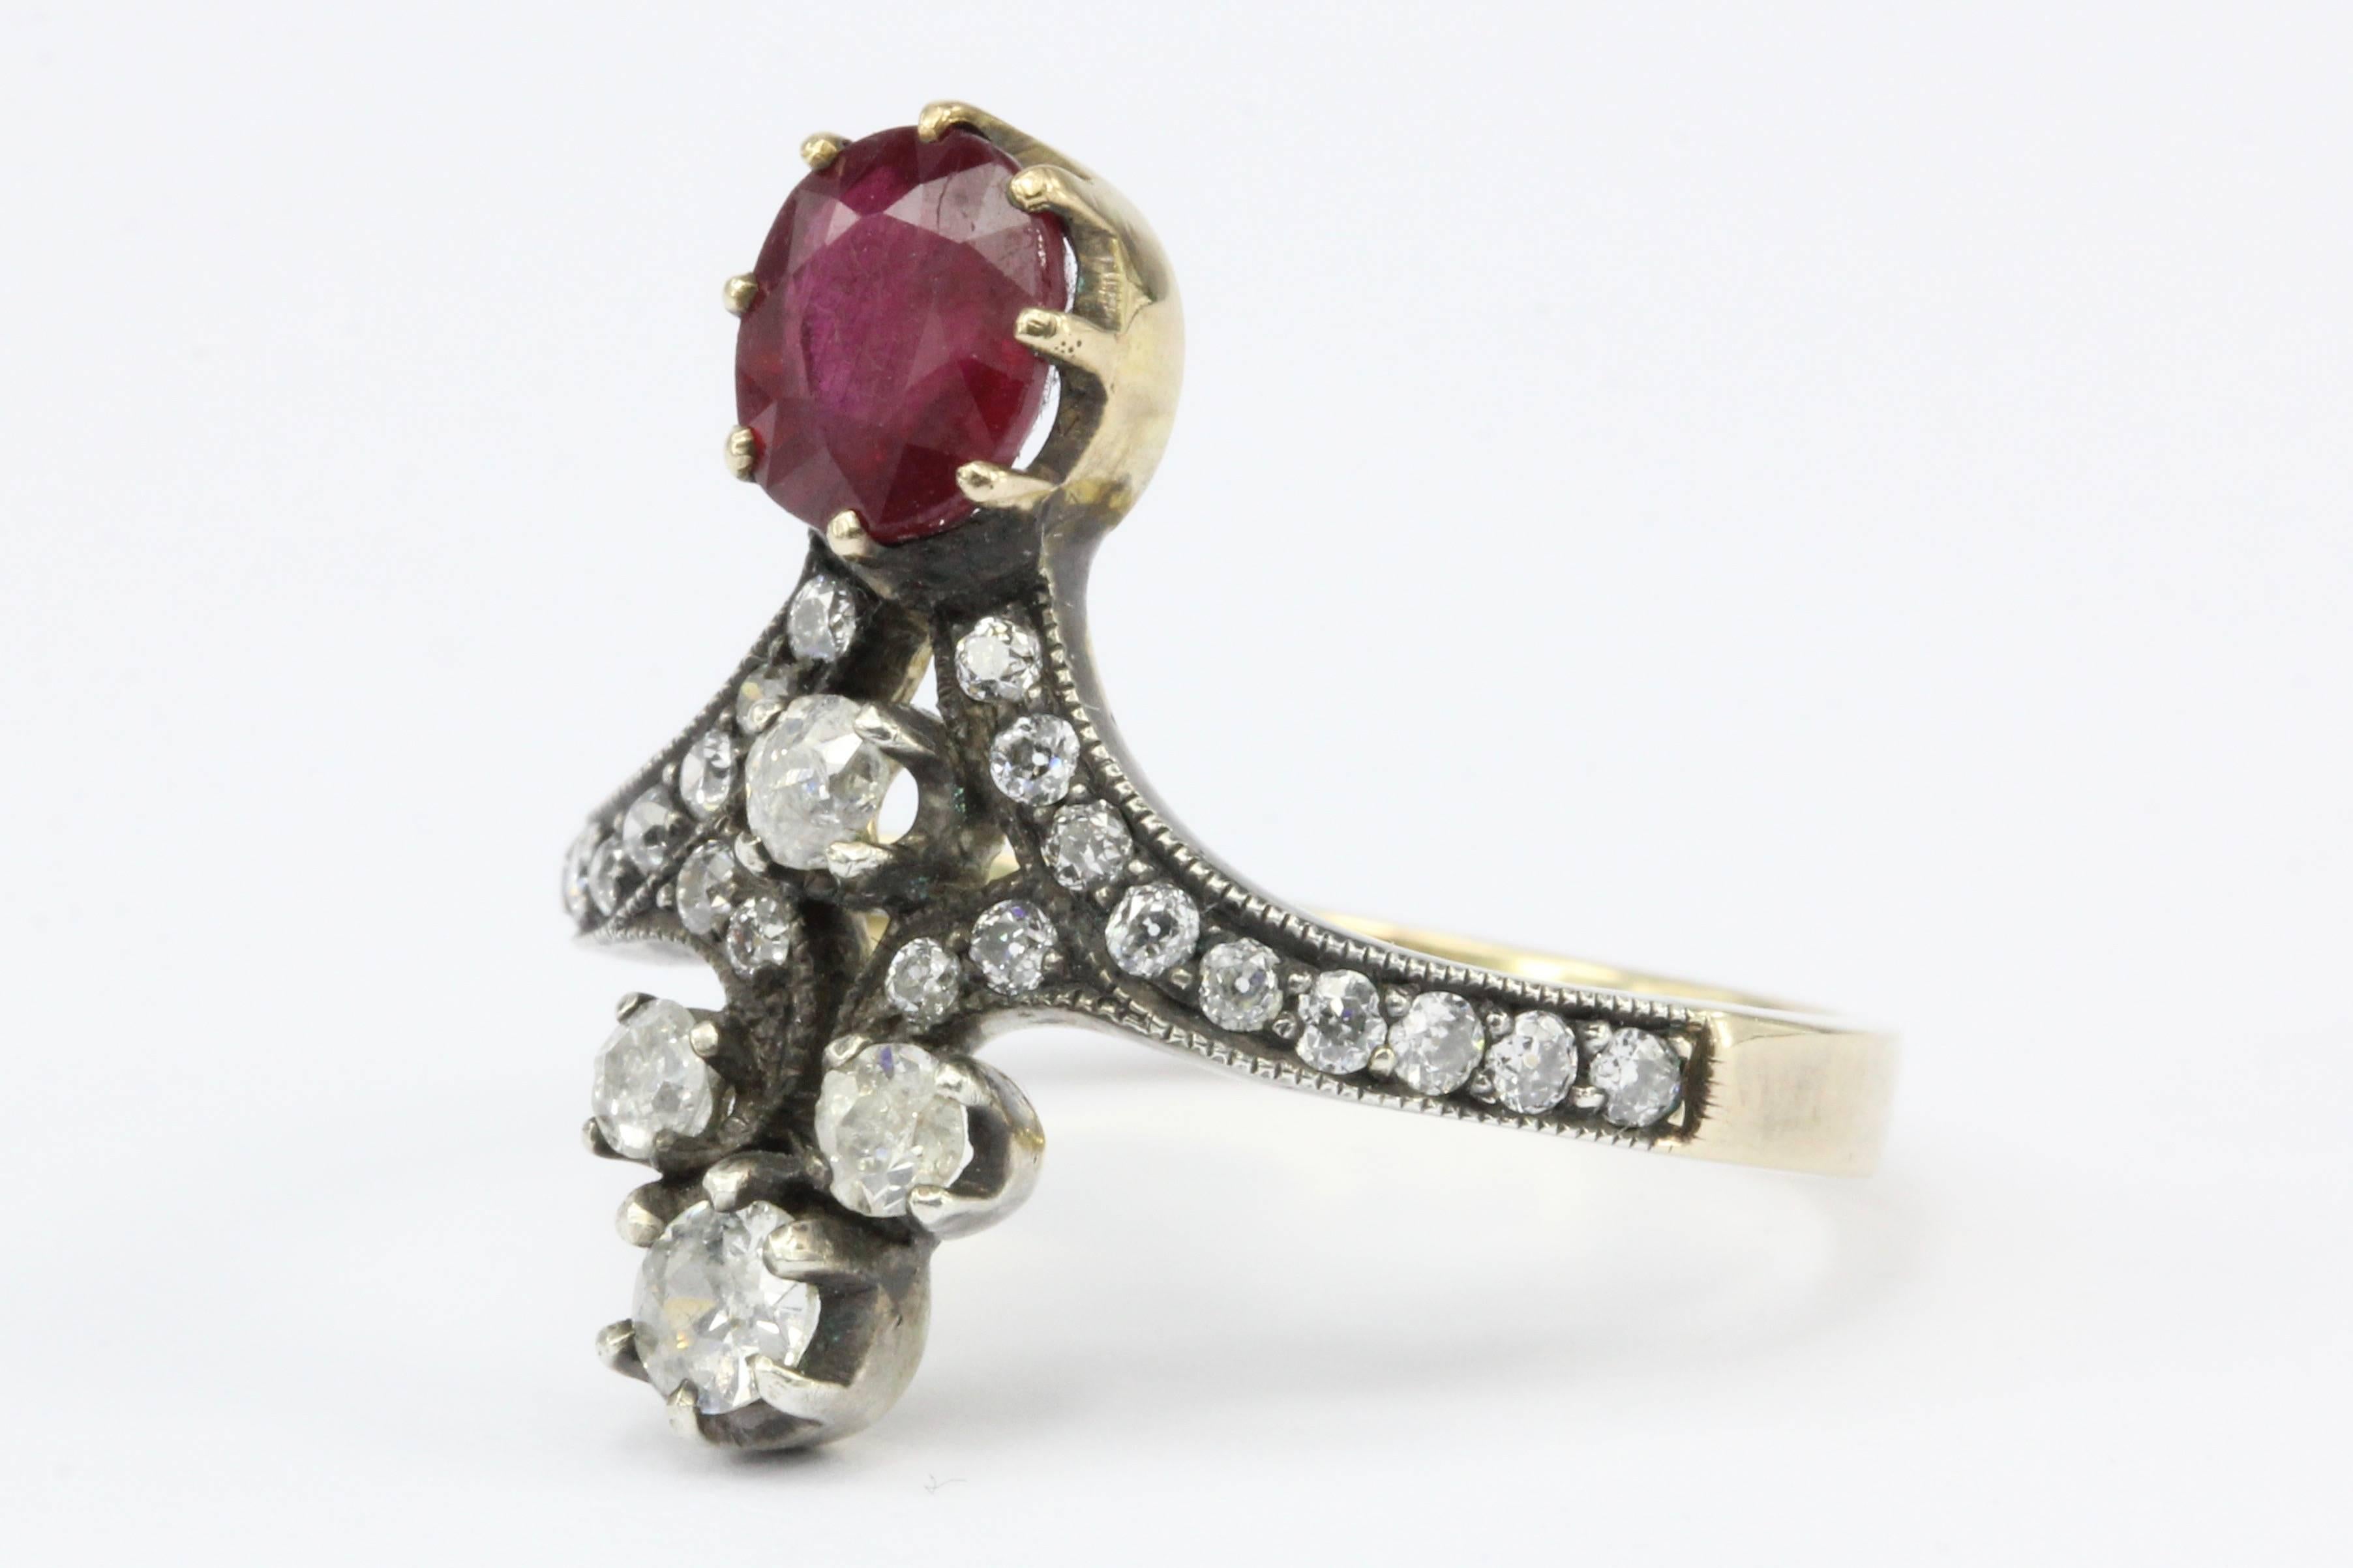 Era: Victorian  

Composition: 18K Yellow Gold & Silver Top

Primary Stone: Natural Ruby 

Primary Stone Carat Weight: Approximately 1 CT

Secondary Stone: (26x) Diamond 

Secondary Stone Cut: Old European Cut 

Secondary Stone Color: G-J

Secondary